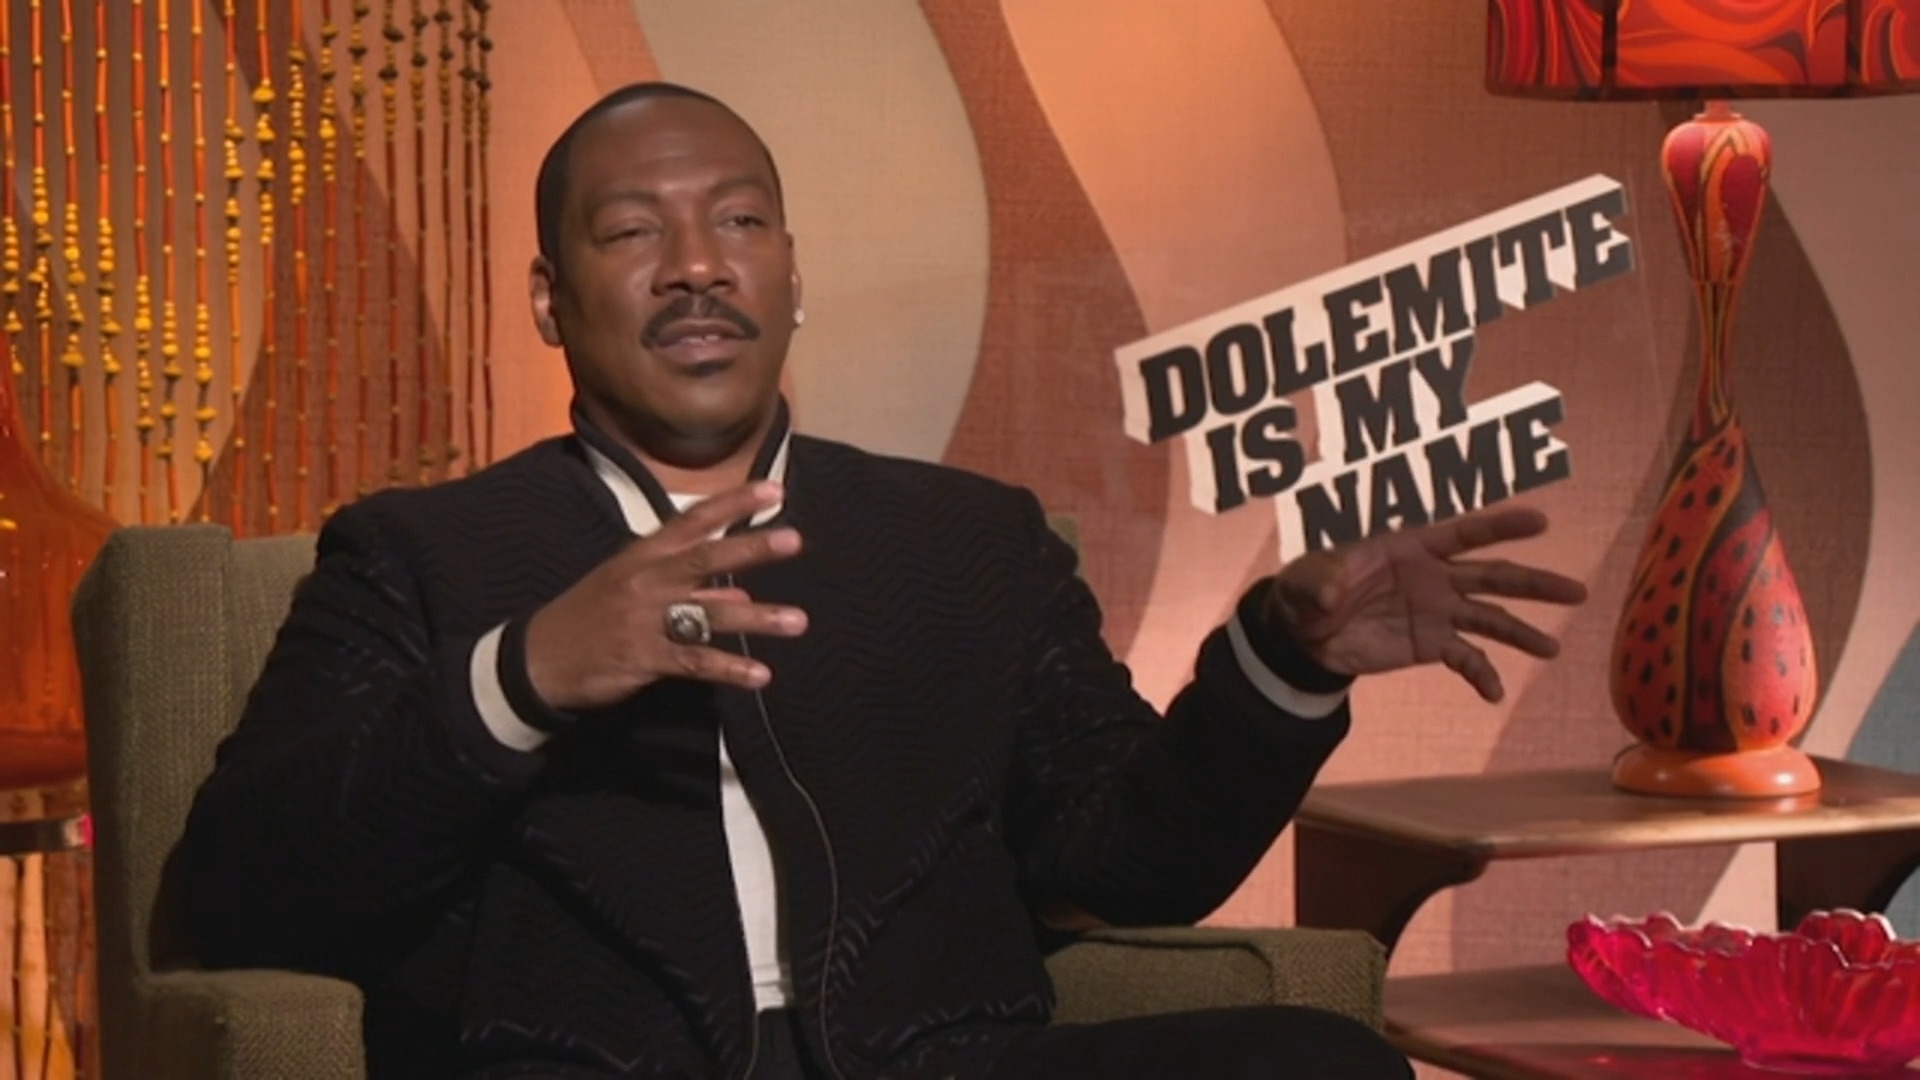 Eddie Murphy says ‘Dolemite Is My Name’ (and Obama’s urging) spurred his return to stand-up